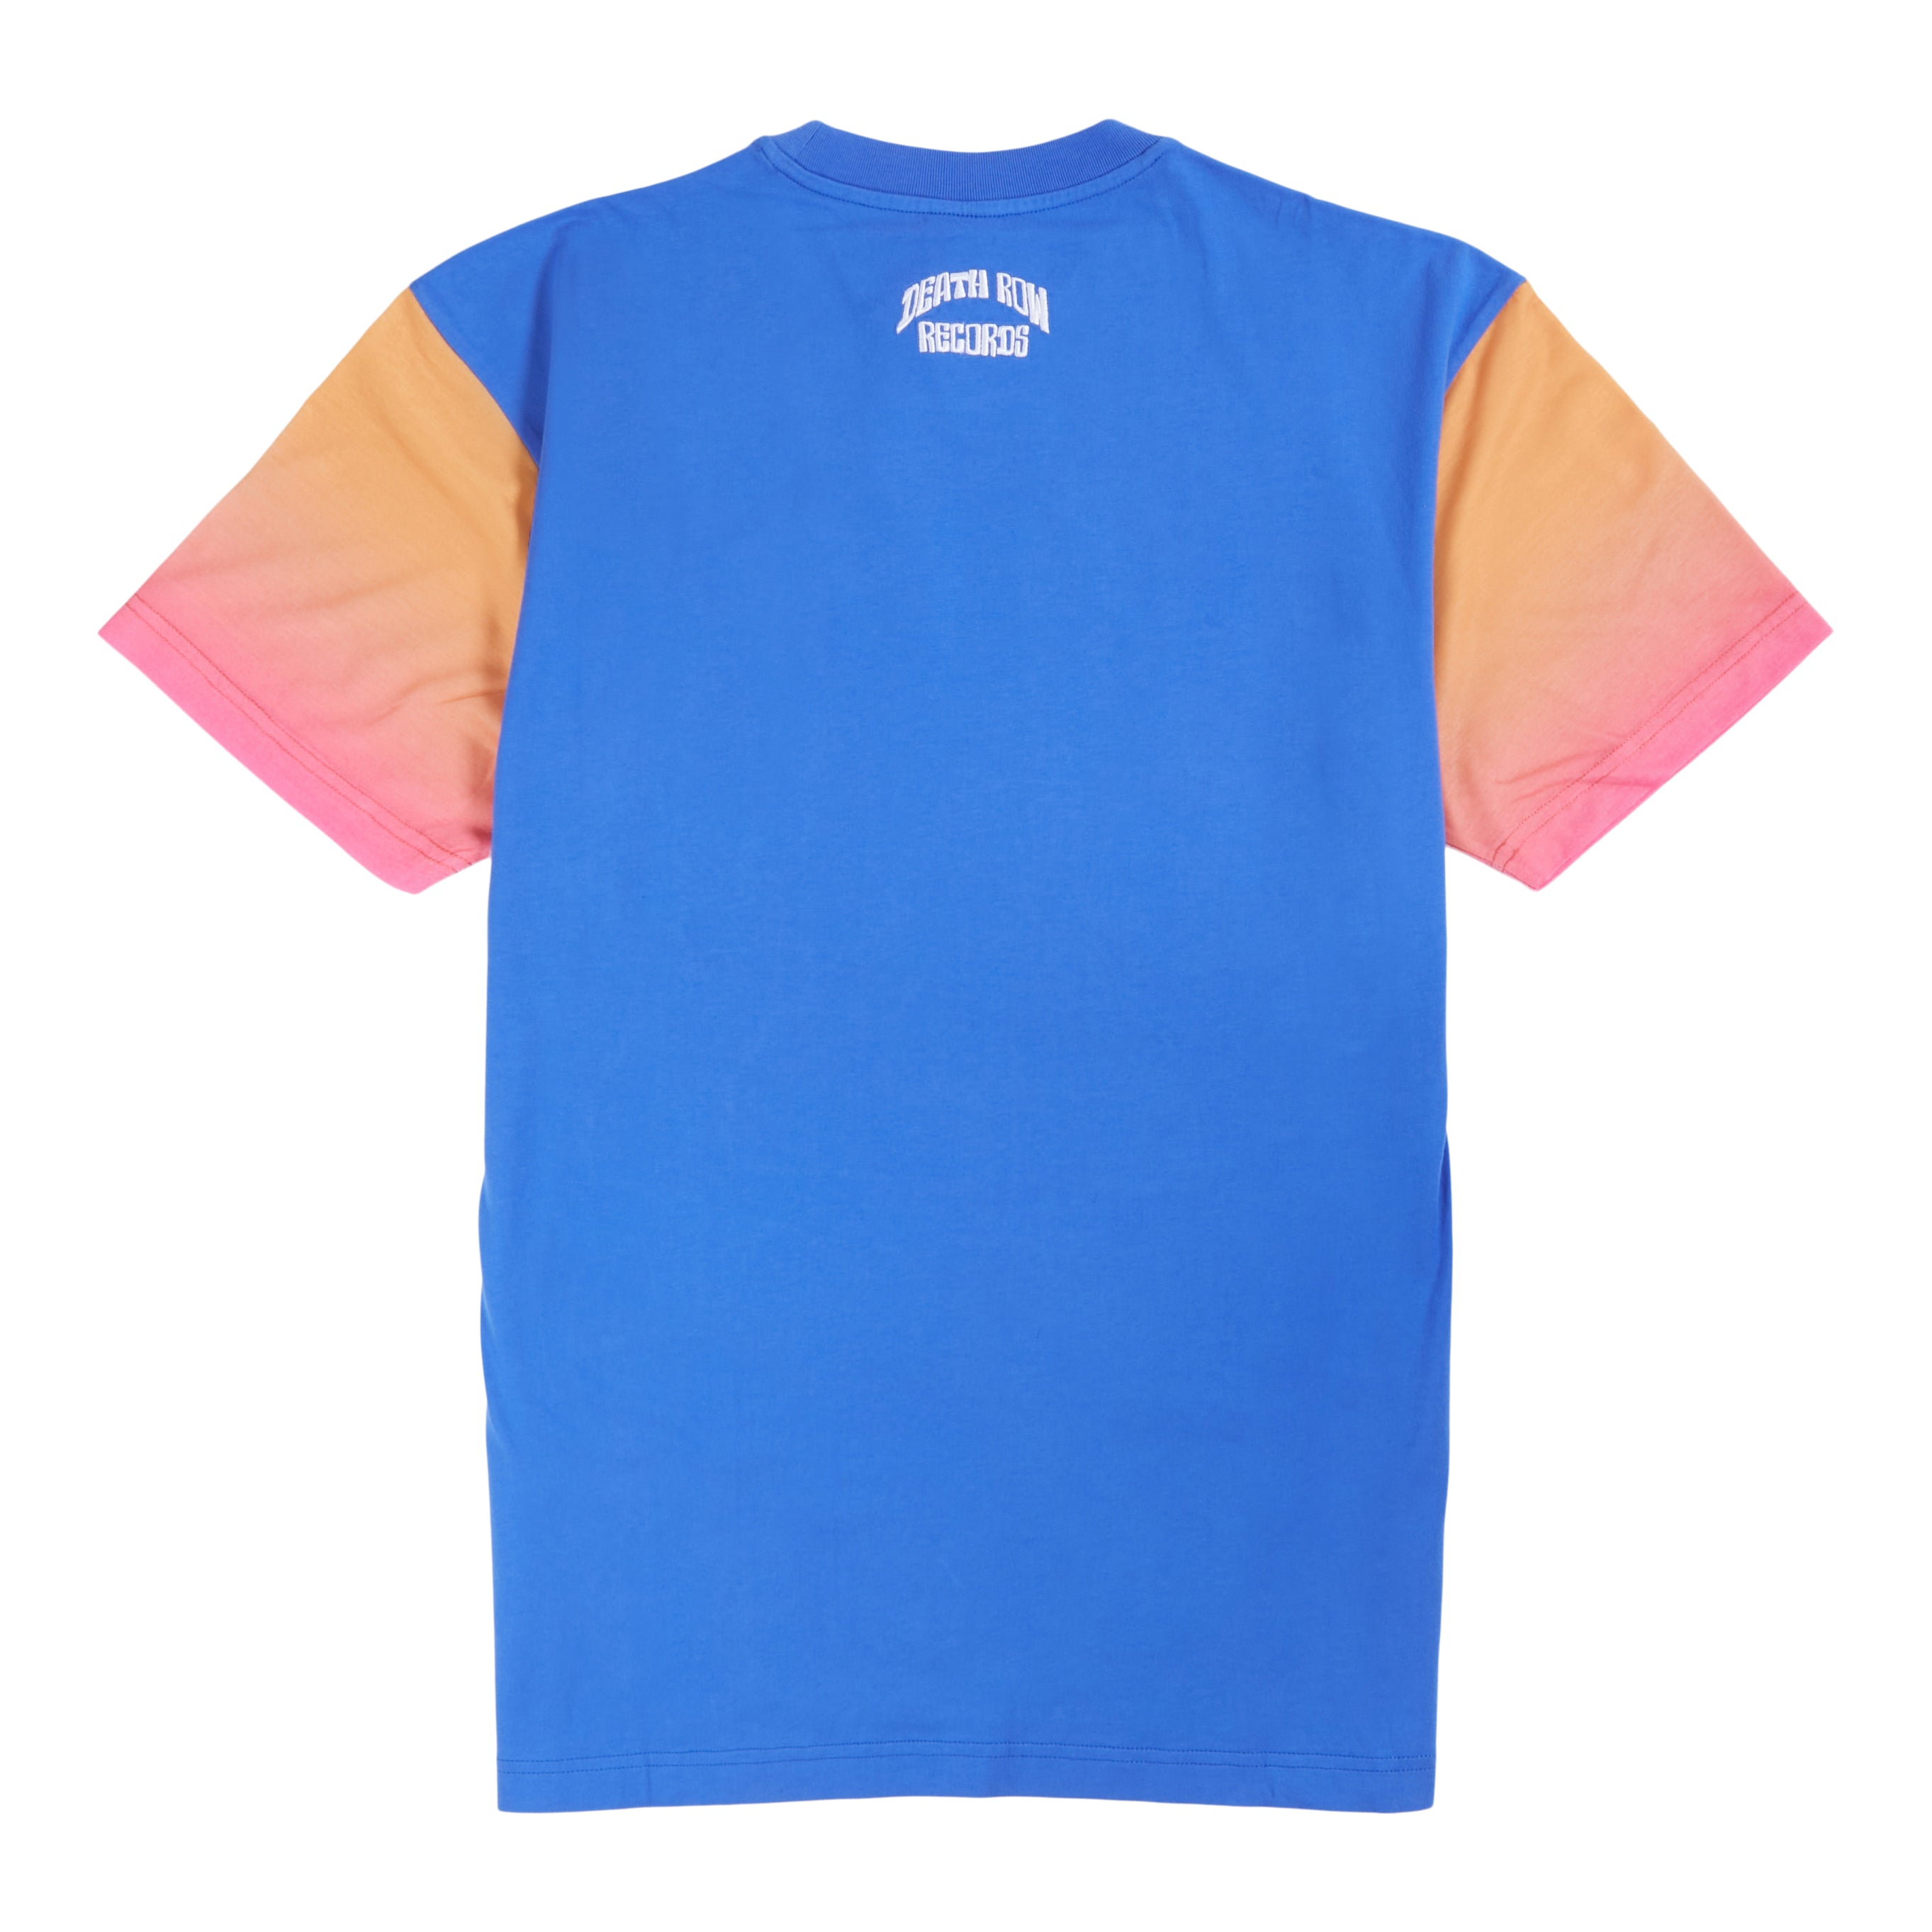 Dr. Bombay Embroidered Sunset Tee